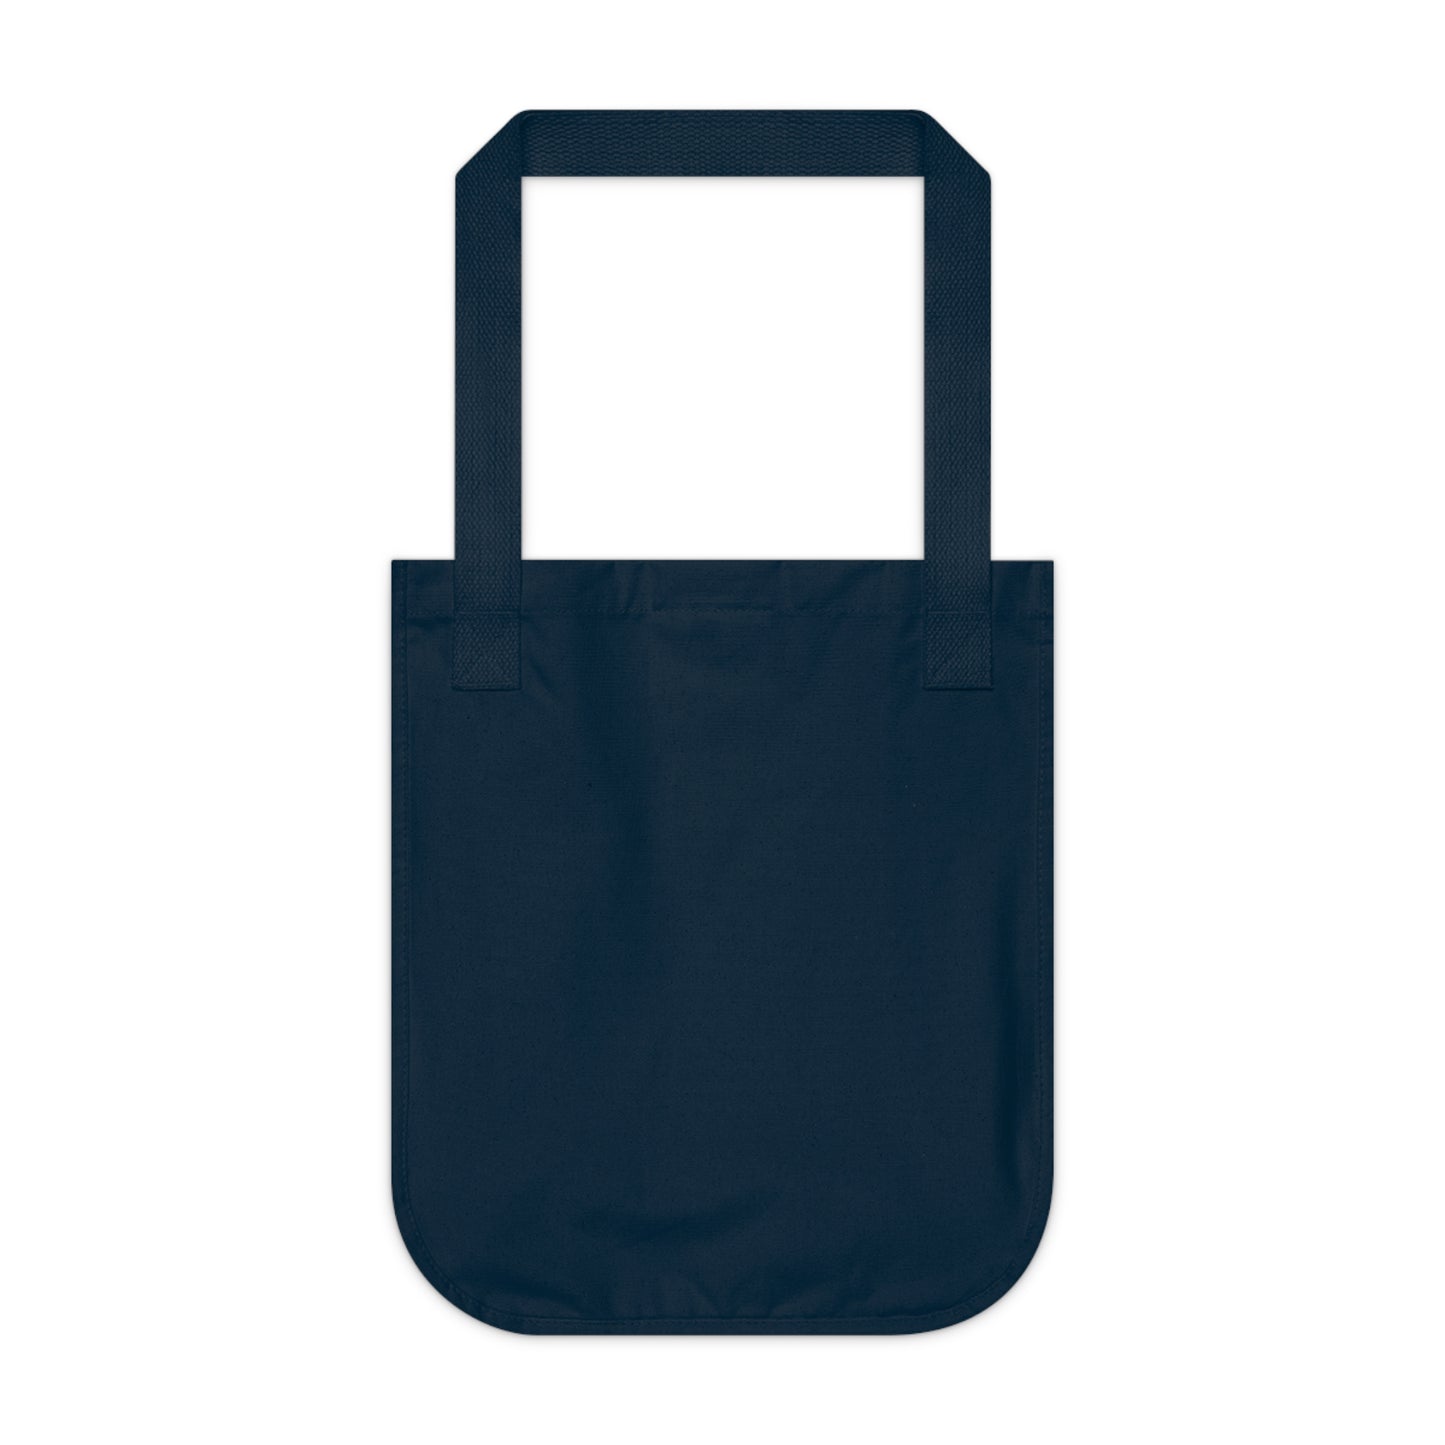 "The Triumphant Power of Love" - Bam Boo! Lifestyle Eco-friendly Tote Bag